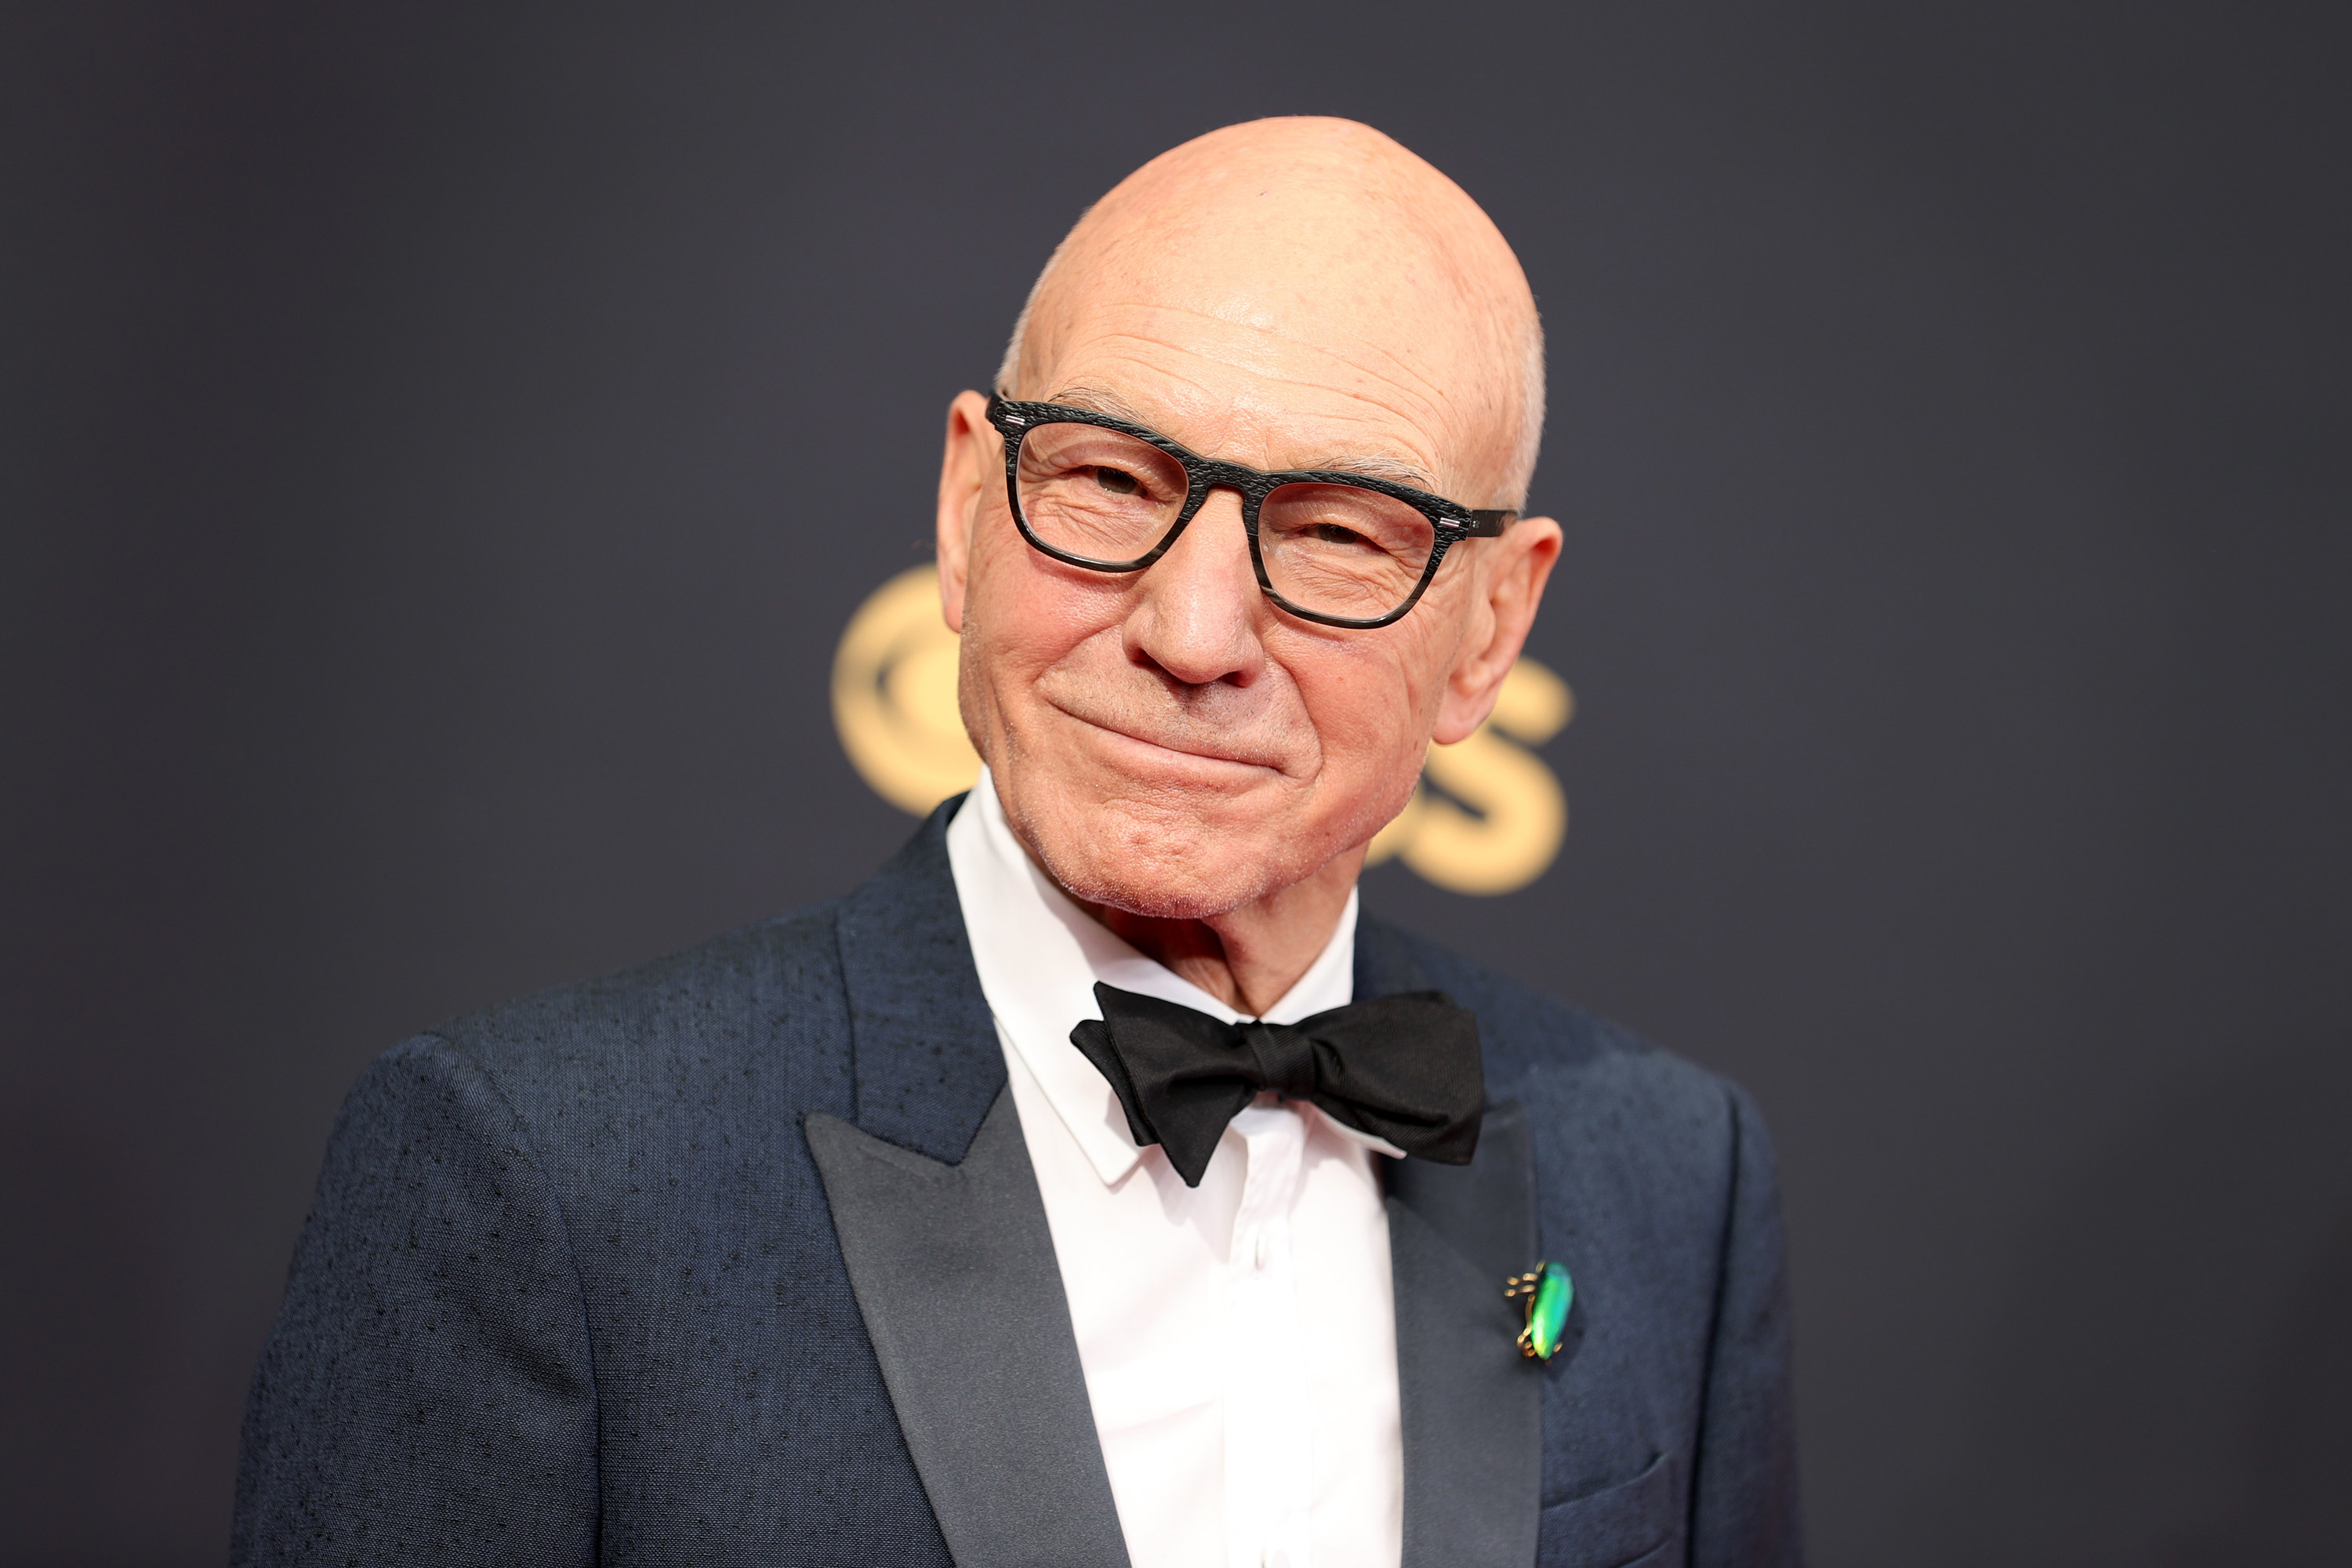 Patrick Stewart smiles in a tuxedo at an awards show